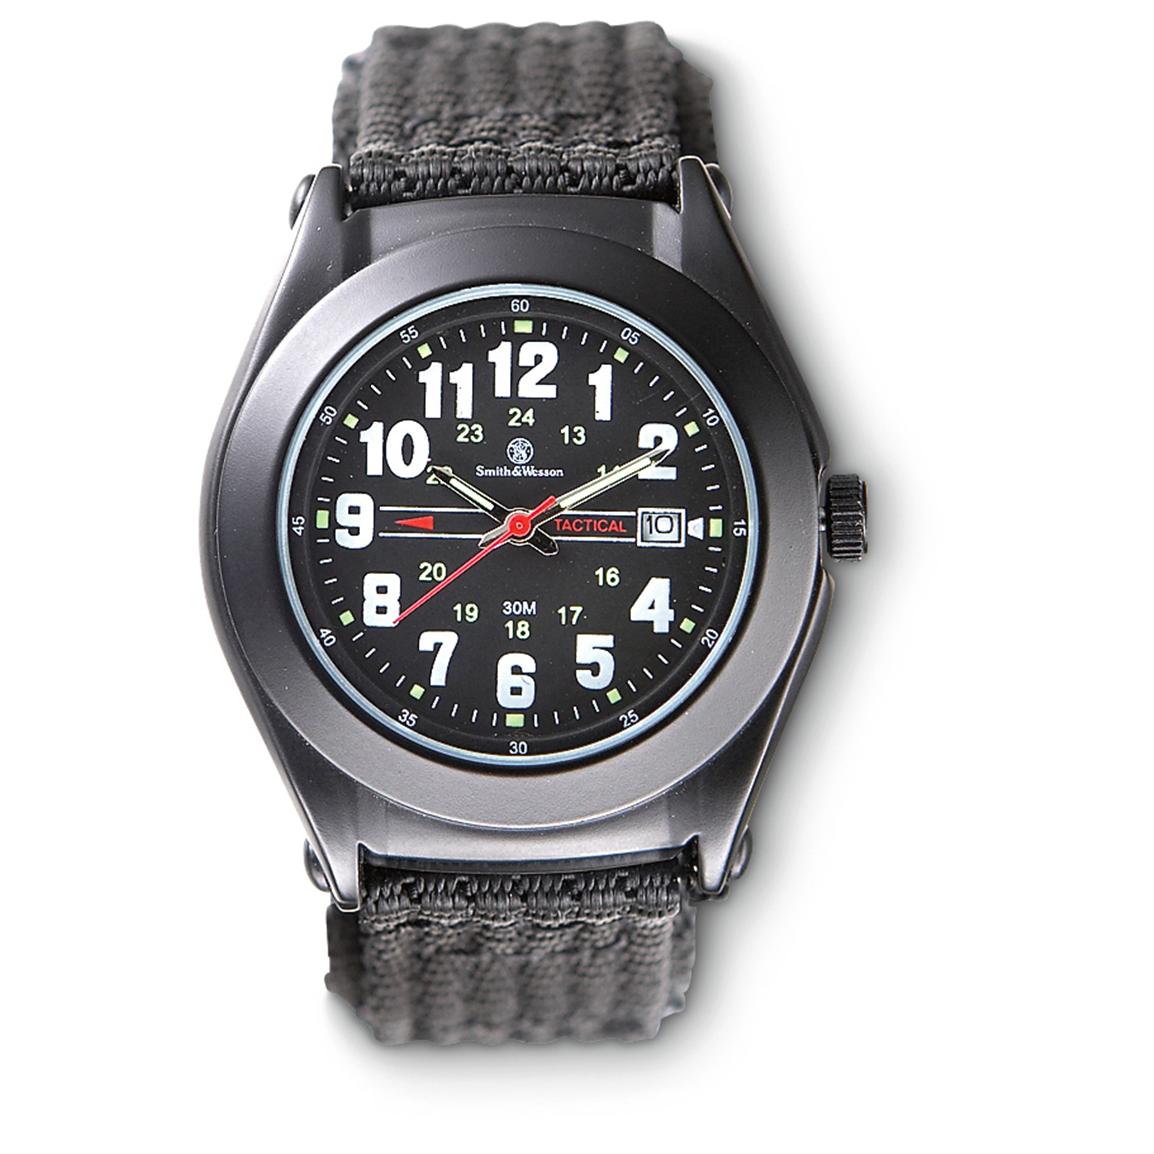 Smith And Wesson Tactical Watch 171611 Watches At Sportsman S Guide